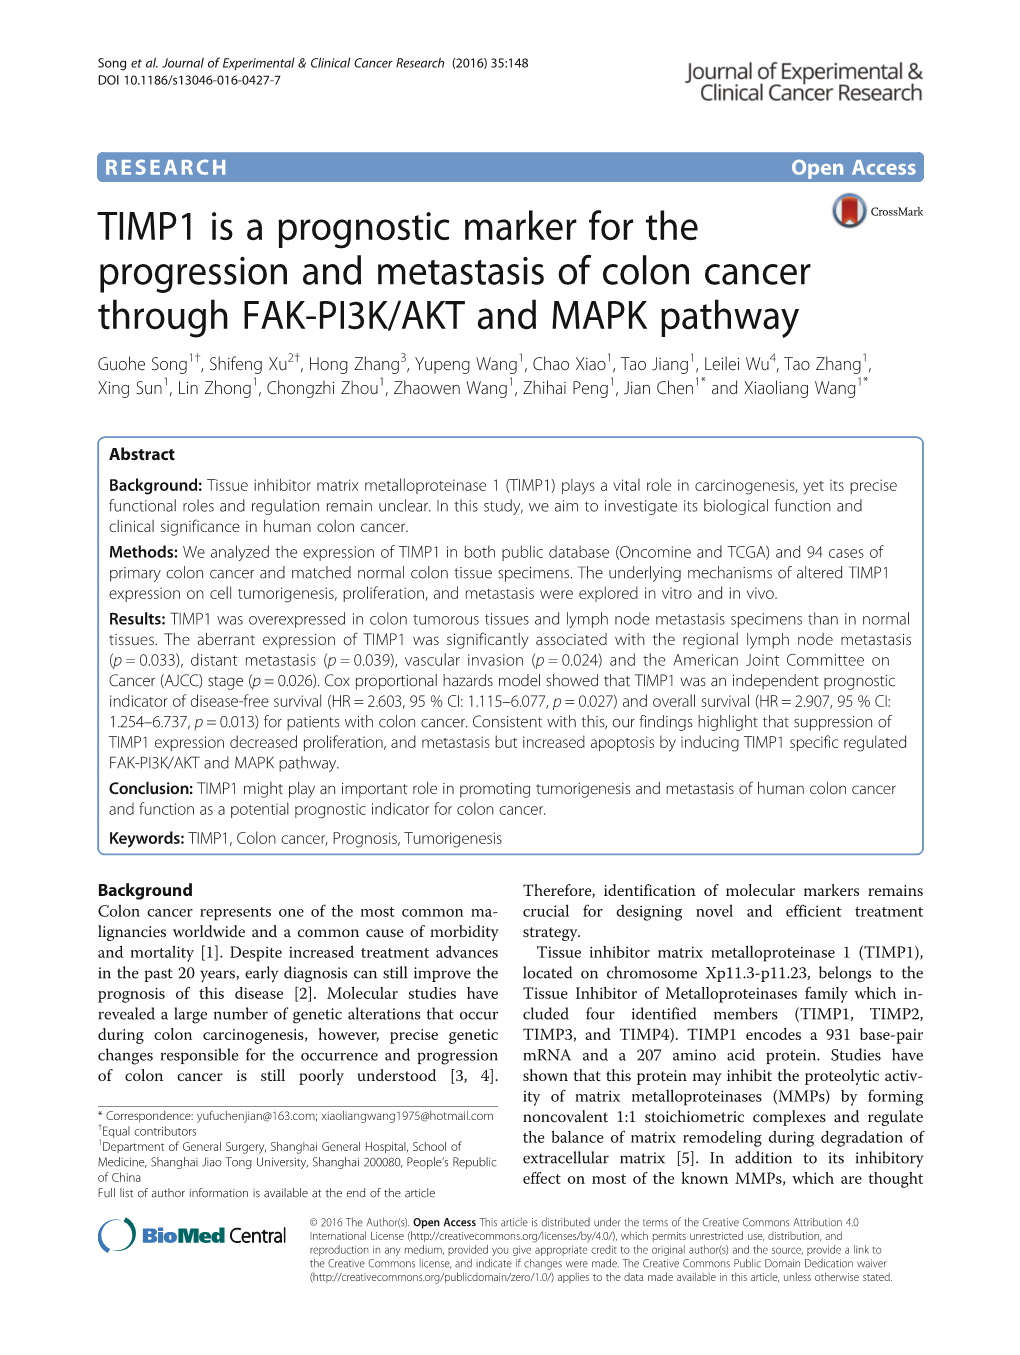 TIMP1 Is a Prognostic Marker for the Progression and Metastasis Of